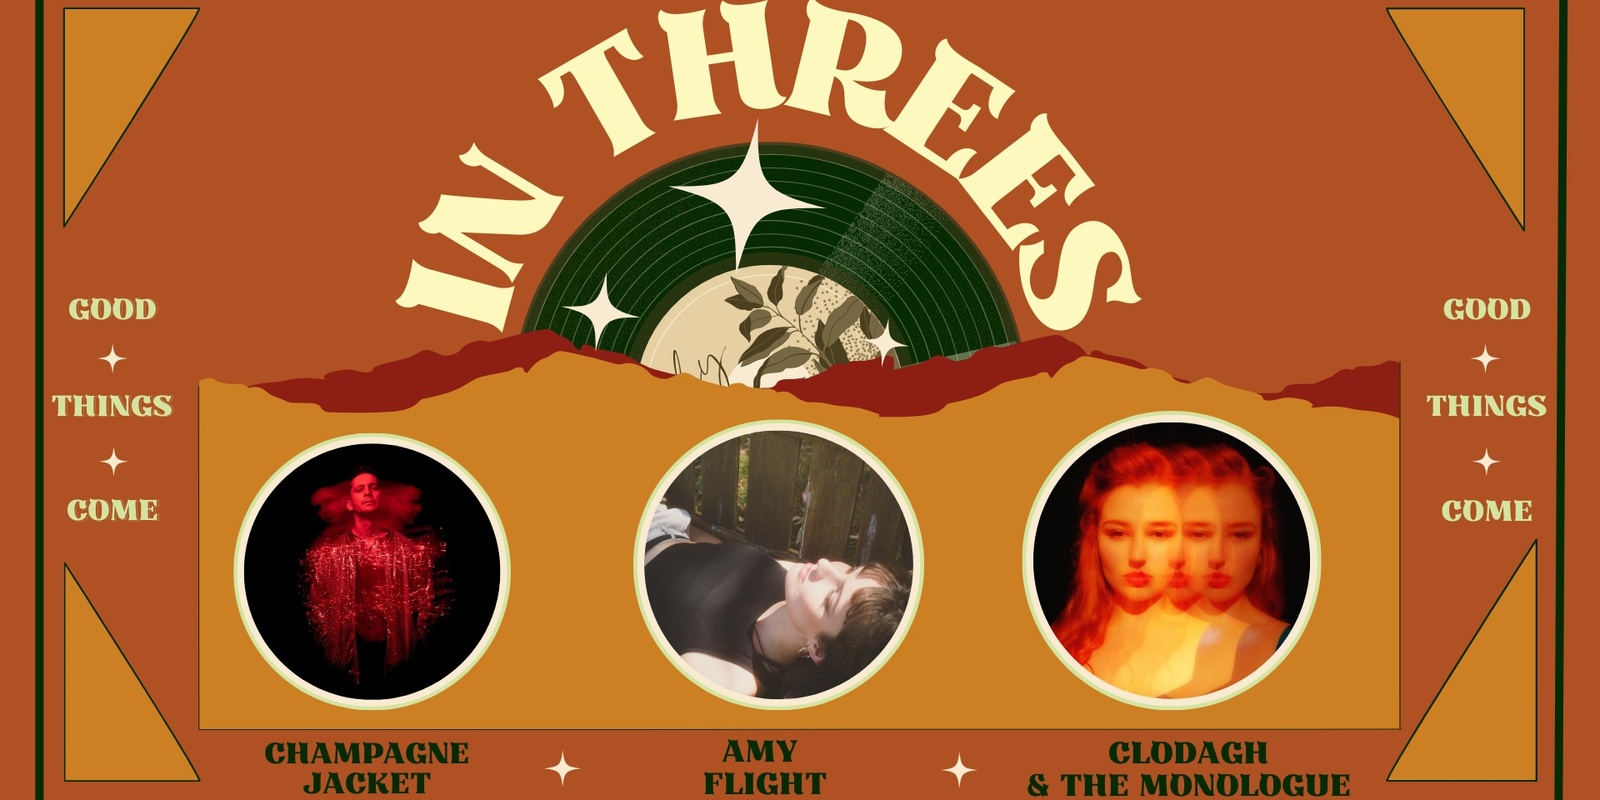 Banner image for Good Things Come in Threes with Clodagh & the Monologue, Champagne Jacket and Amy Flight